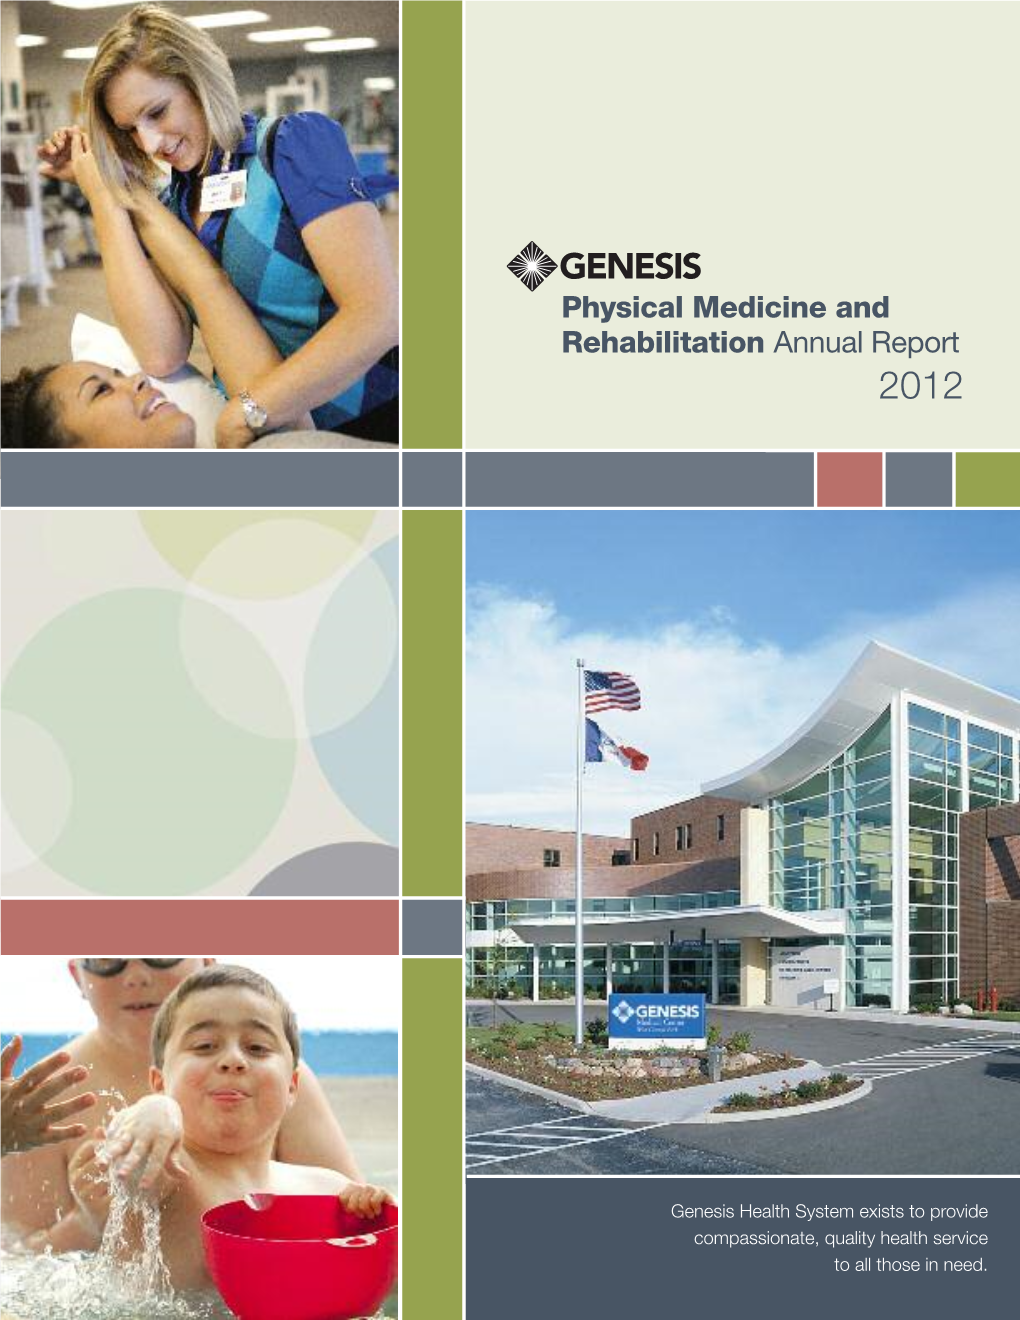 Physical Medicine and Rehabilitation Annual Report 2012